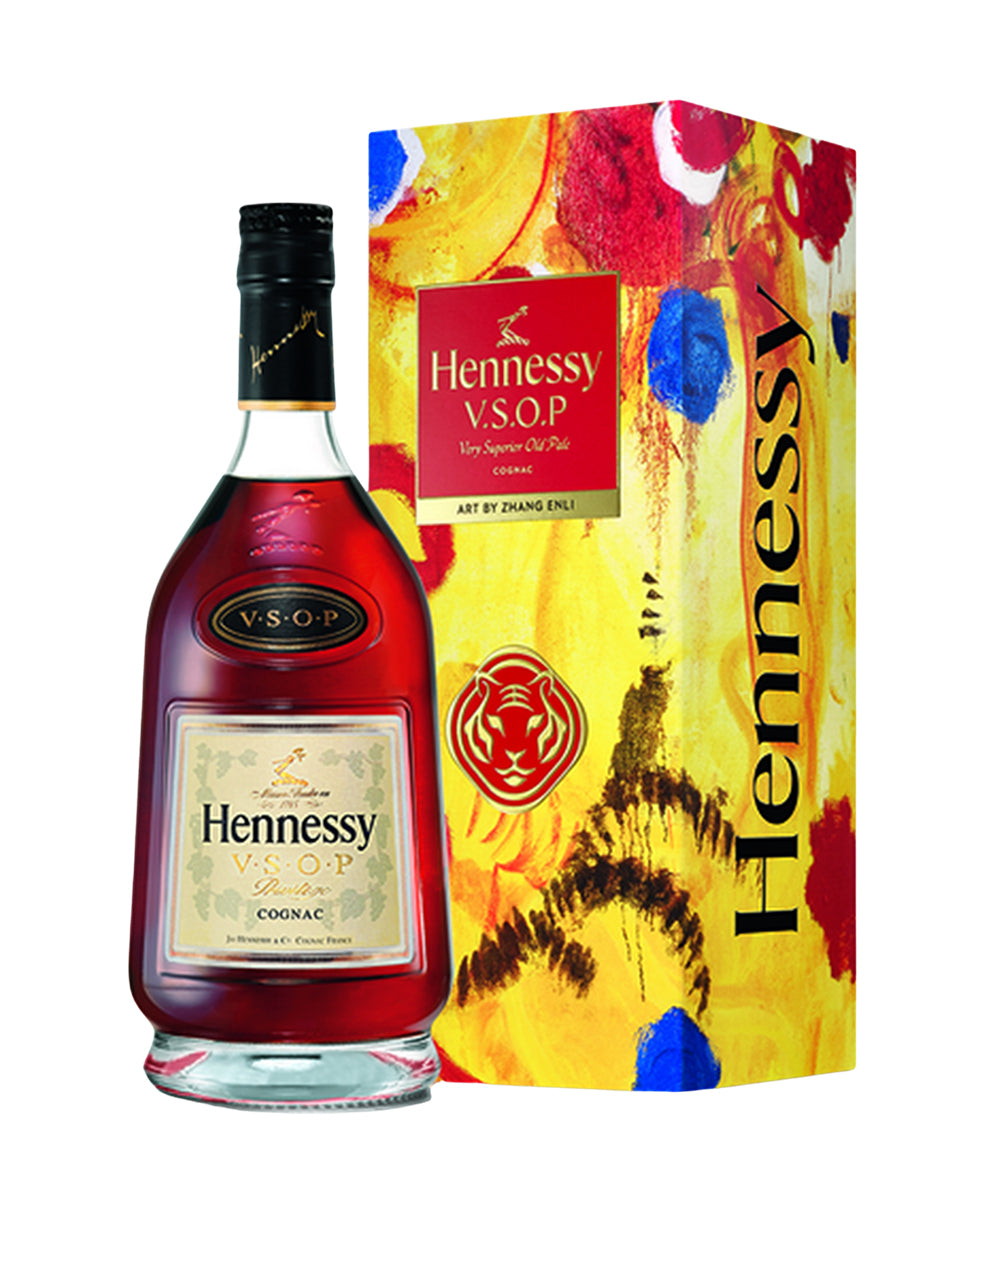 Hennessy VSOP Privilege Limited Edition by Zhang Huan (750ml)